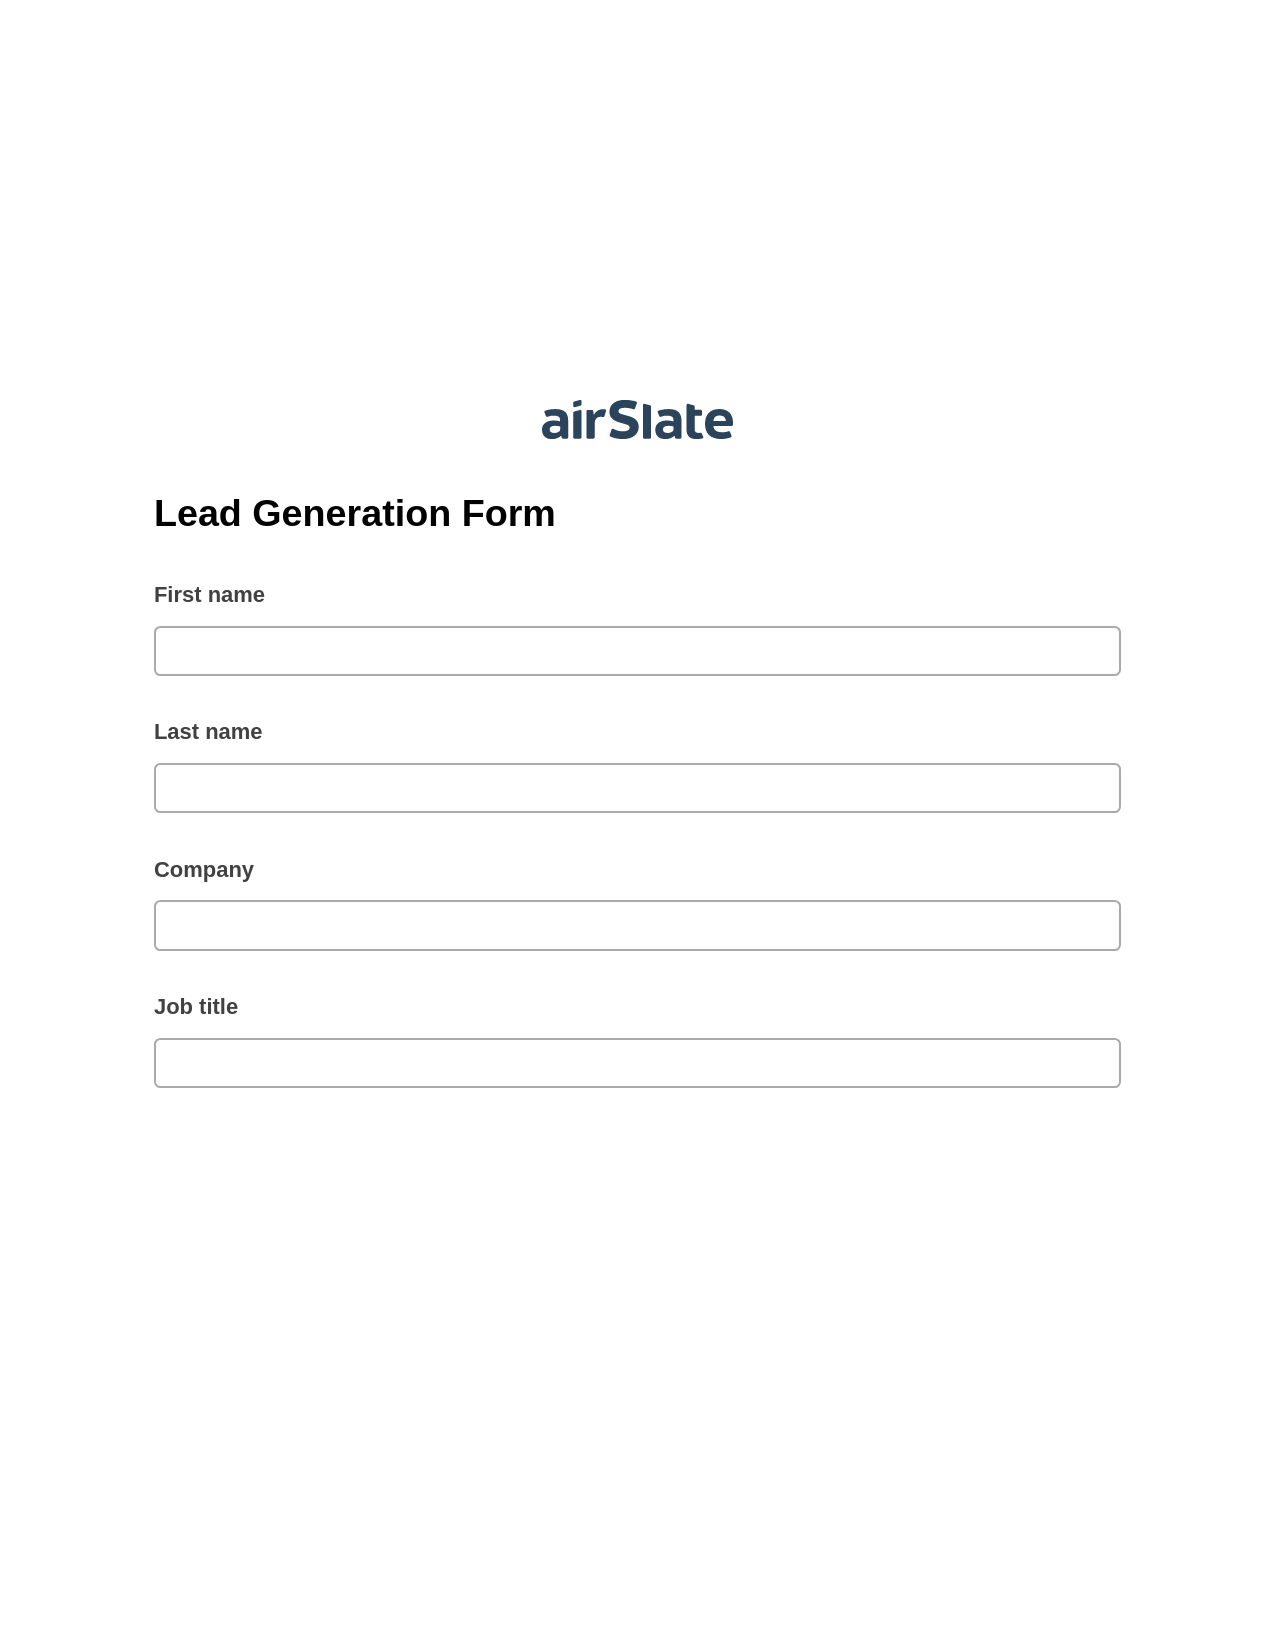 Multirole Lead Generation Form Pre-fill from Salesforce Records with SOQL Bot, Remove Slate Bot, Export to Salesforce Record Bot